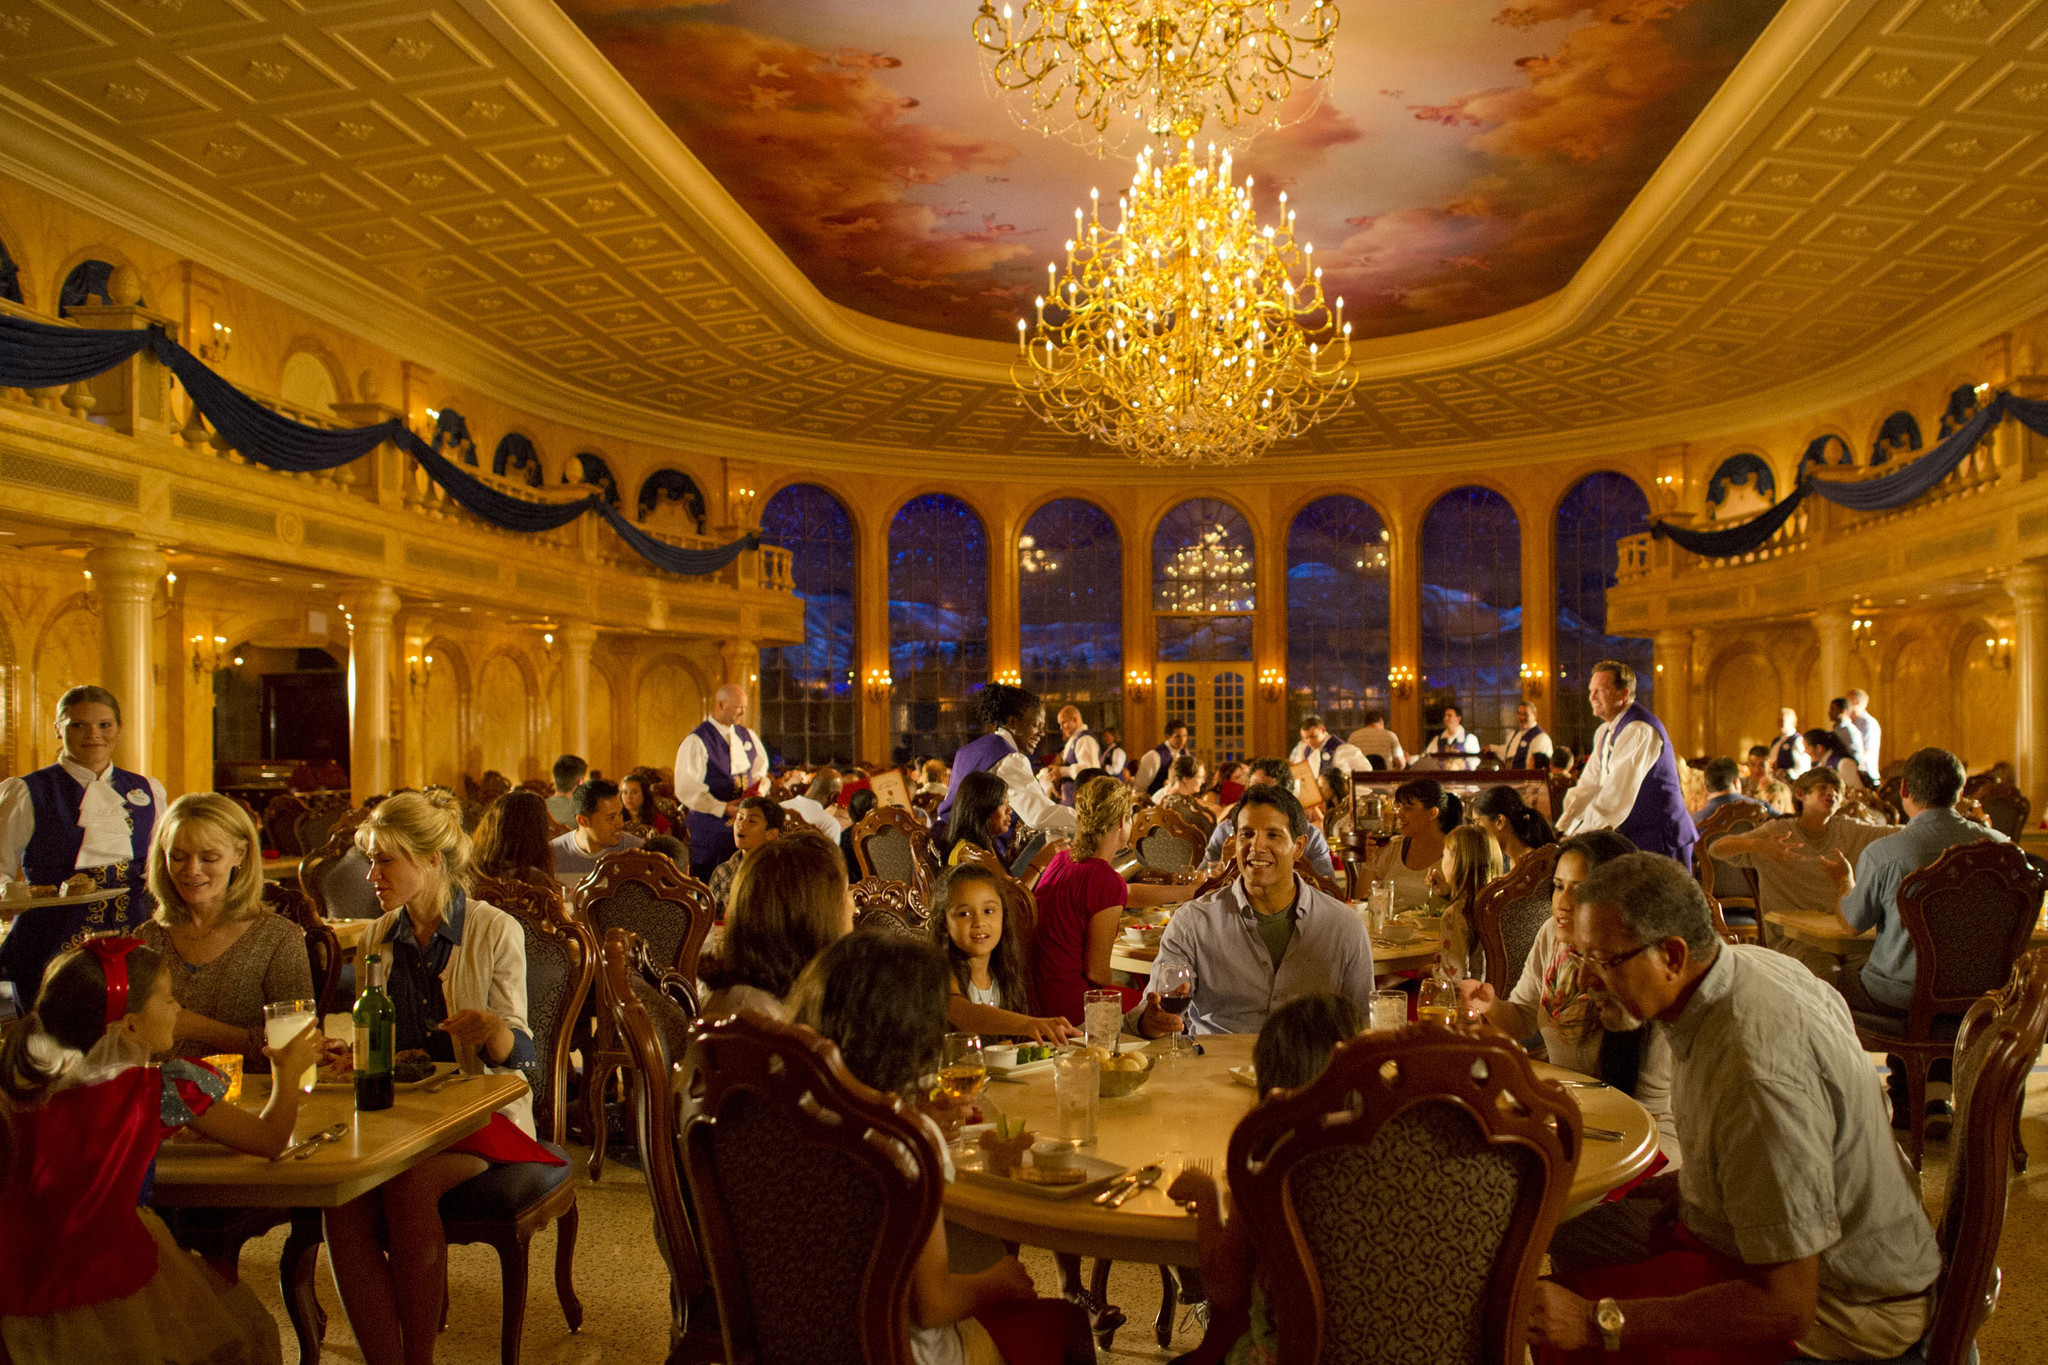 Be Our Guest will serve breakfast at Disney's Magic Kingdom - Orlando